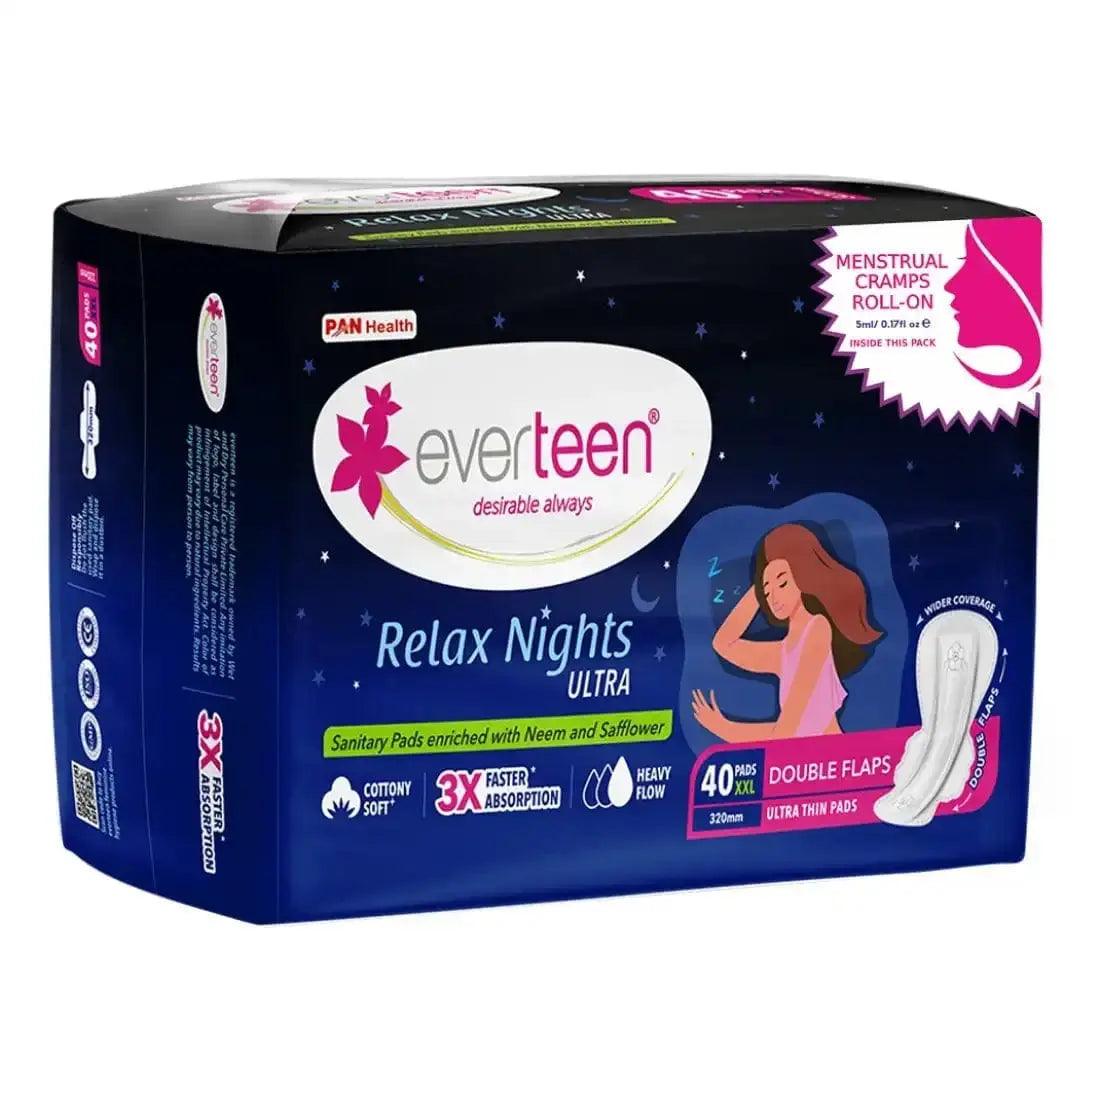 everteen XXL Relax Nights Ultra Thin 40 Sanitary Pads with Neem and Safflower, Menstrual Cramps Roll-On Inside Pack 8906079331187